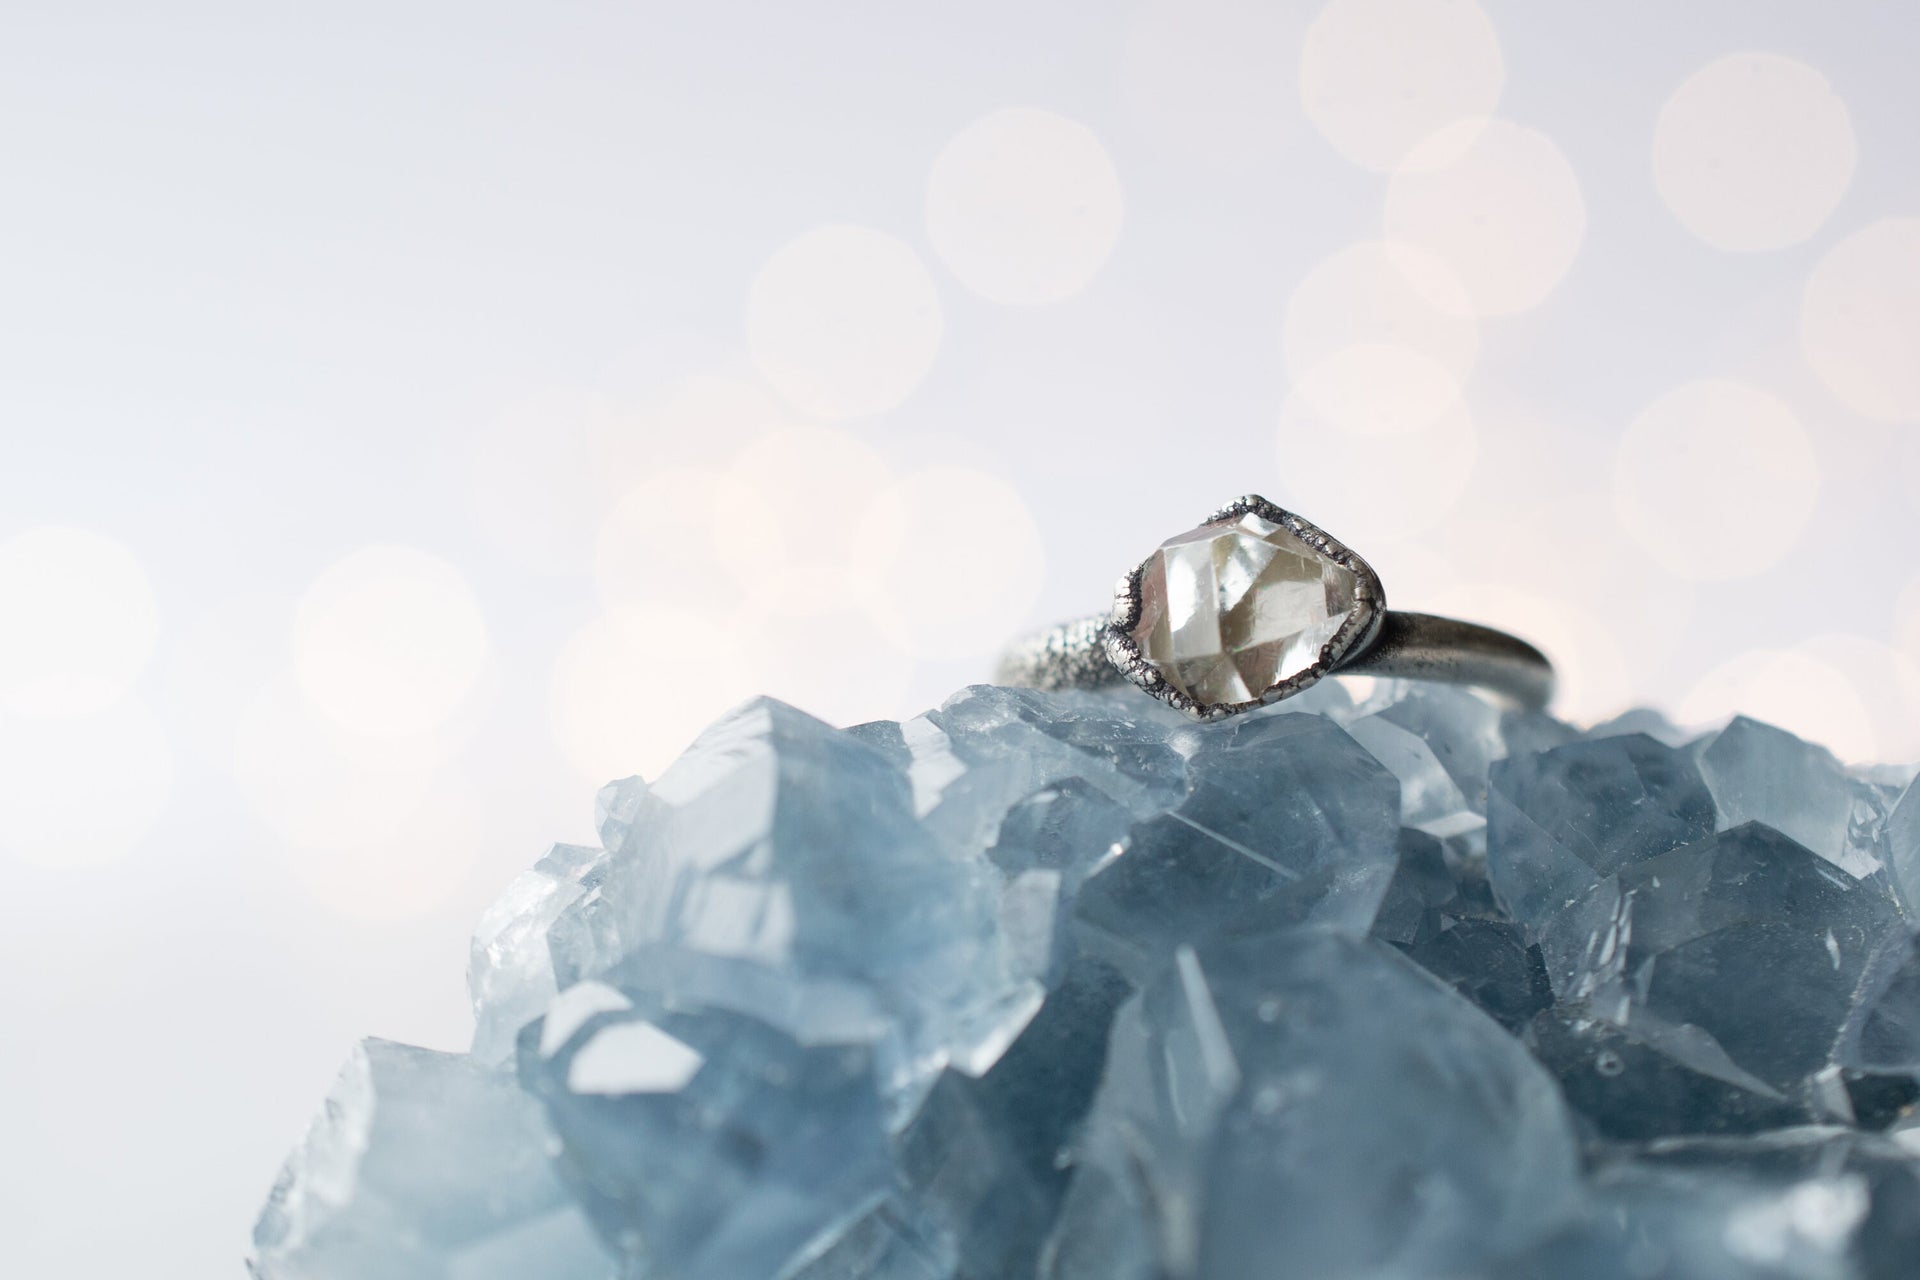 Oxidized silver raw crystal ring | Herkimer diamond ring